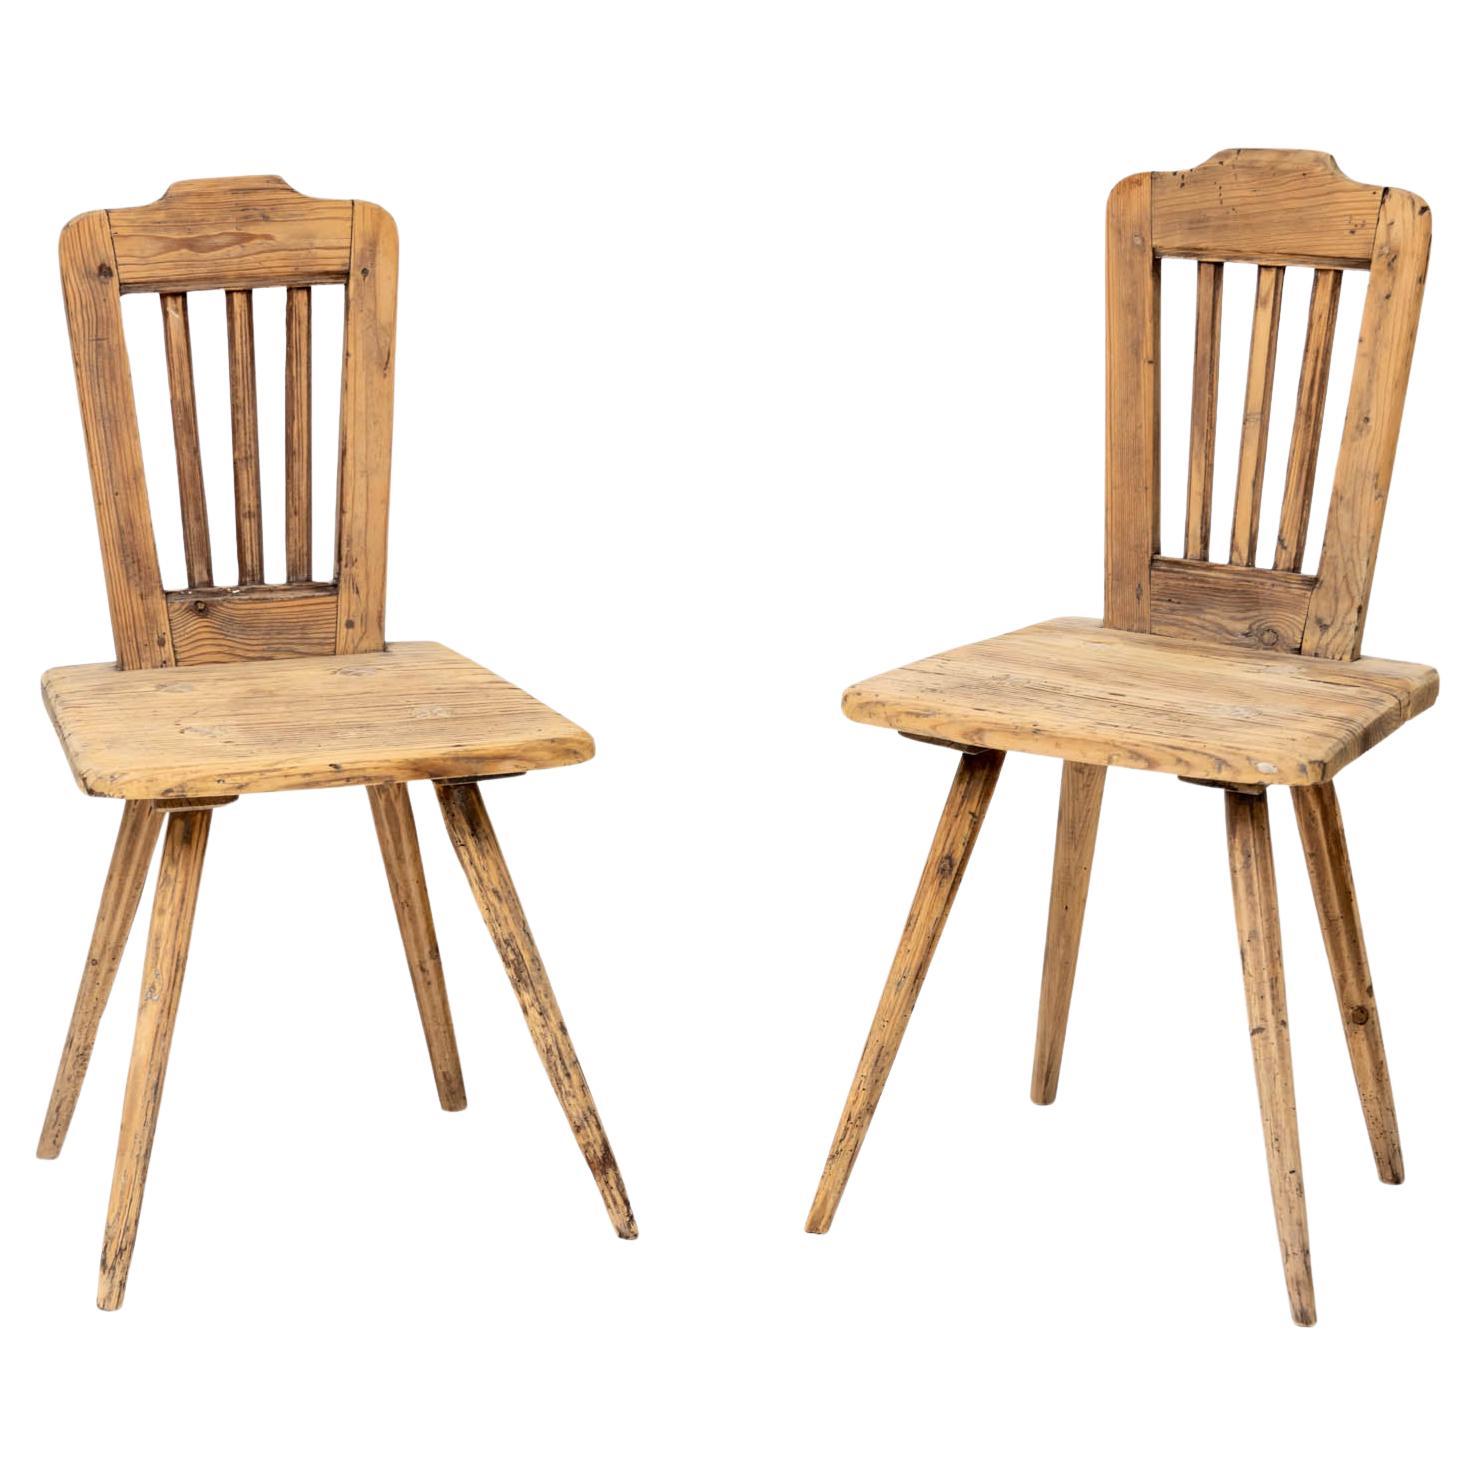 Pair of rustic softwood chairs, 19th century For Sale